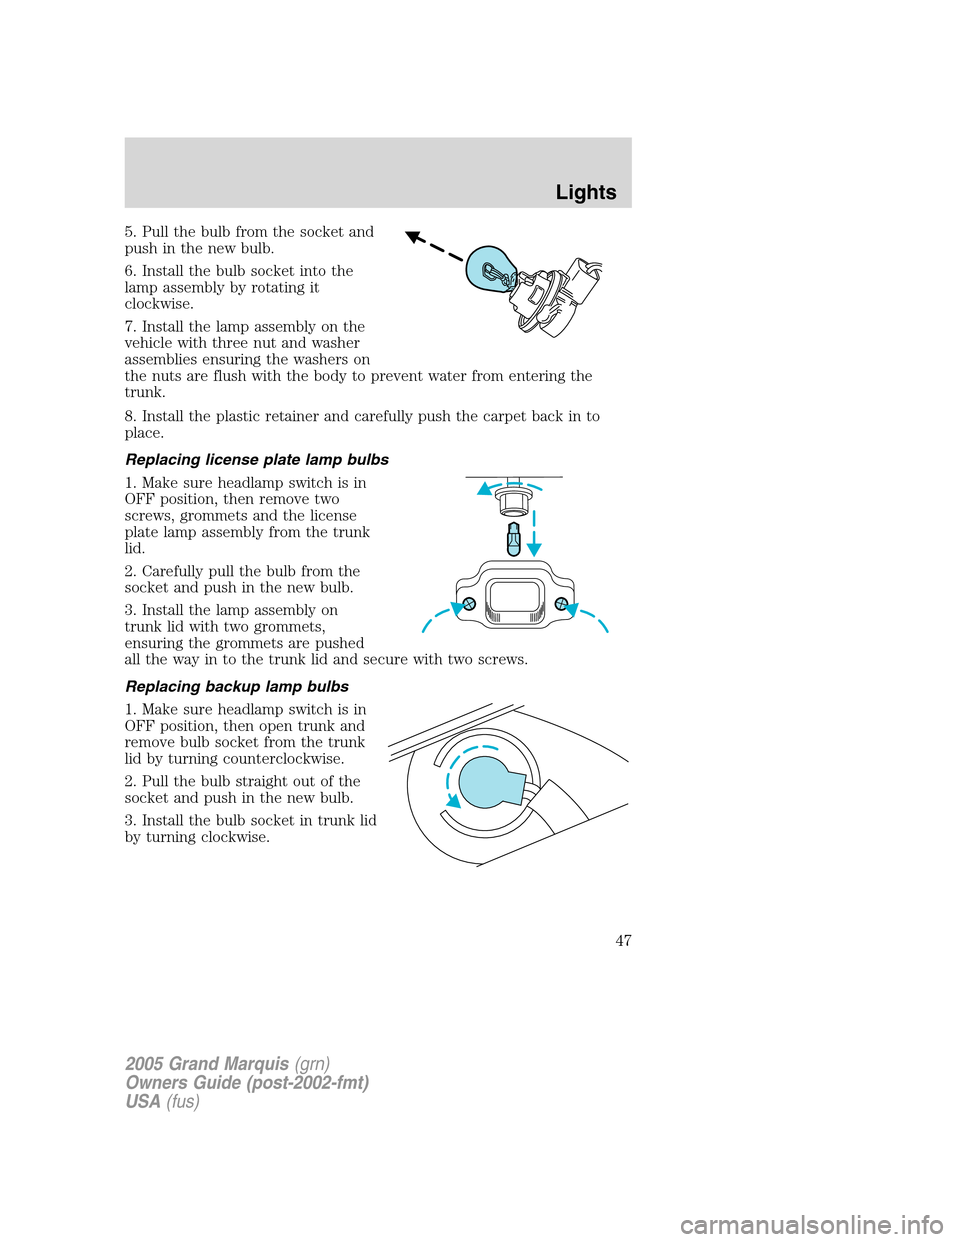 Mercury Grand Marquis 2005  Owners Manuals 5. Pull the bulb from the socket and
push in the new bulb.
6. Install the bulb socket into the
lamp assembly by rotating it
clockwise.
7. Install the lamp assembly on the
vehicle with three nut and wa